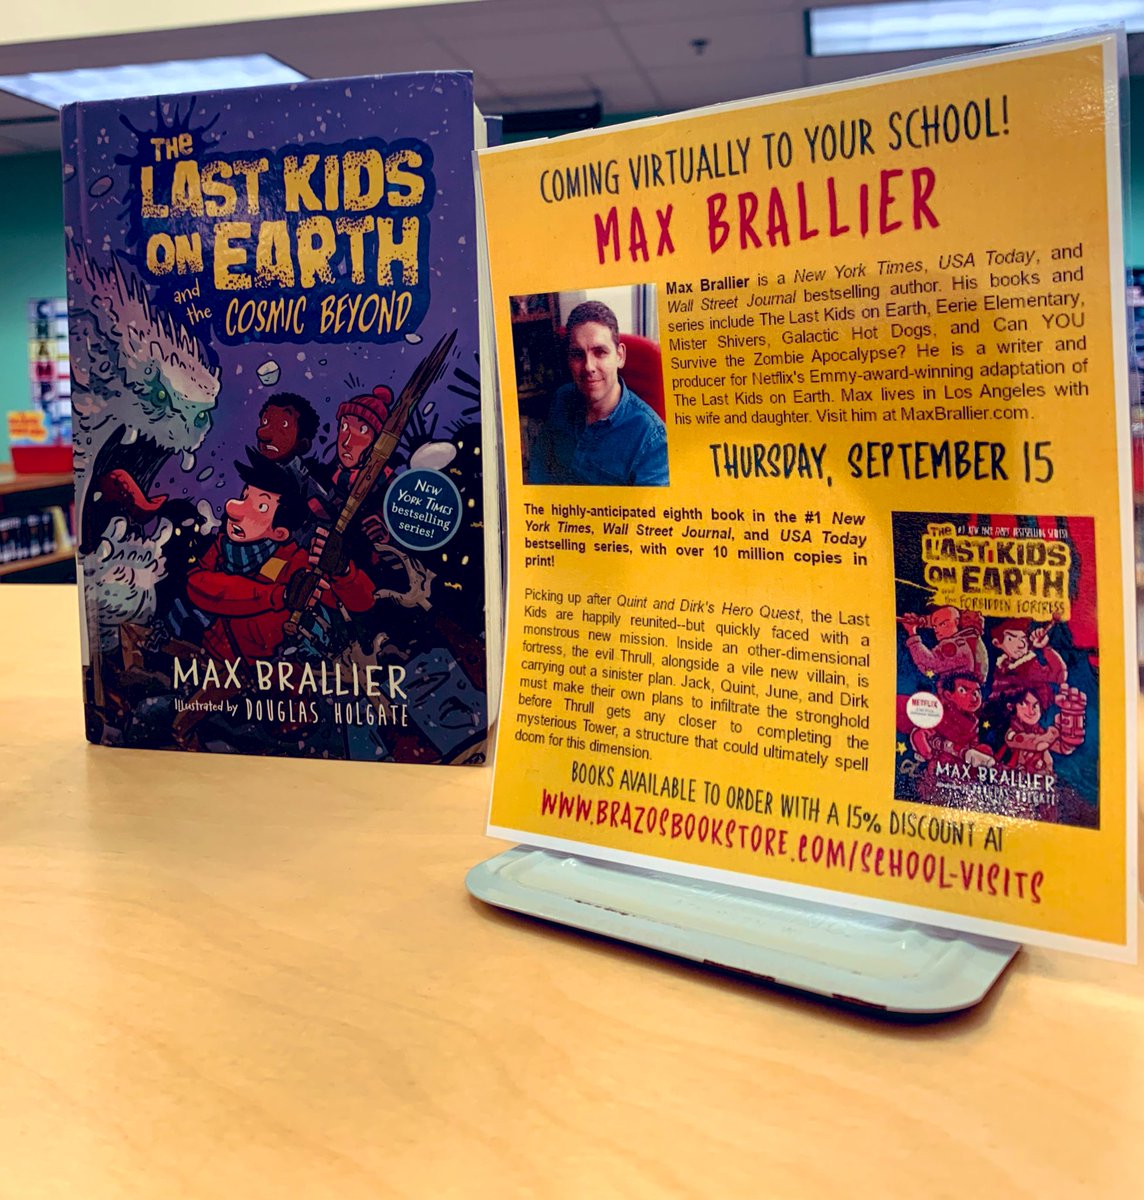 Getting excited about the new @lastkidsonearth book coming out this month! What will author Max Brallier teach us @TwainIB?!?!?